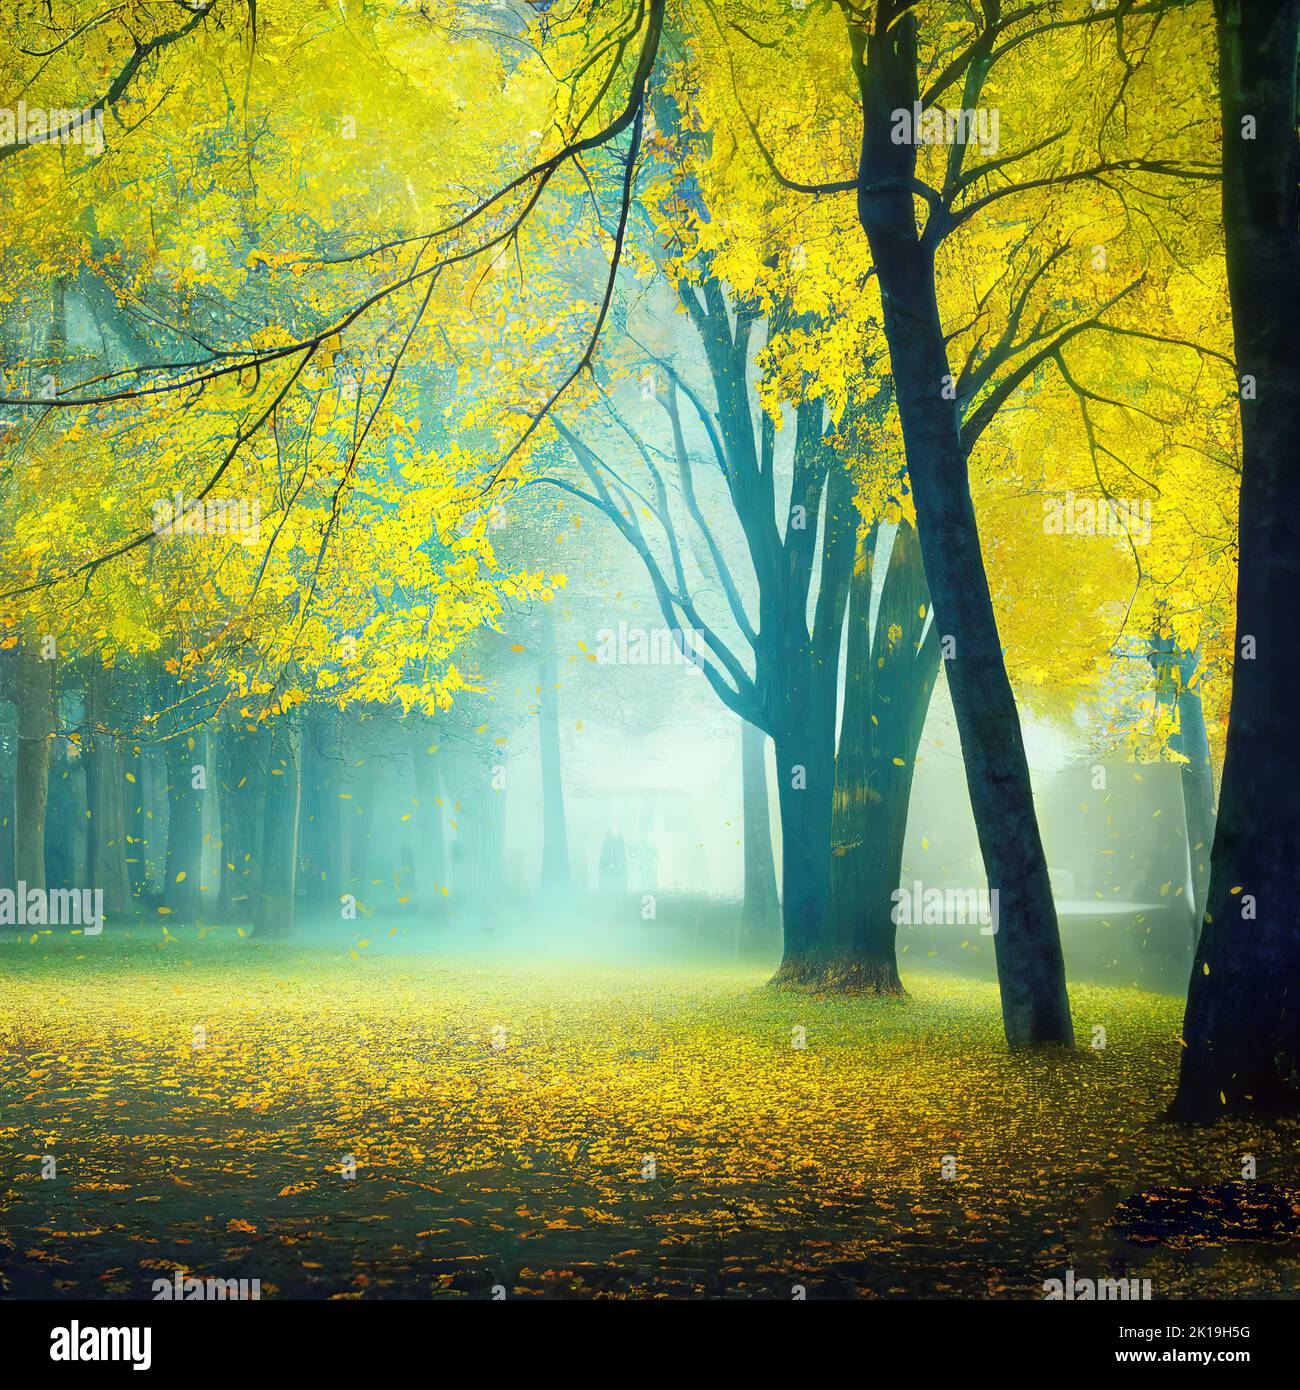 Cold misty morning in autumn park, yellow trees, falling leaves, square format. Digital illustration based on render by neural network Stock Photo